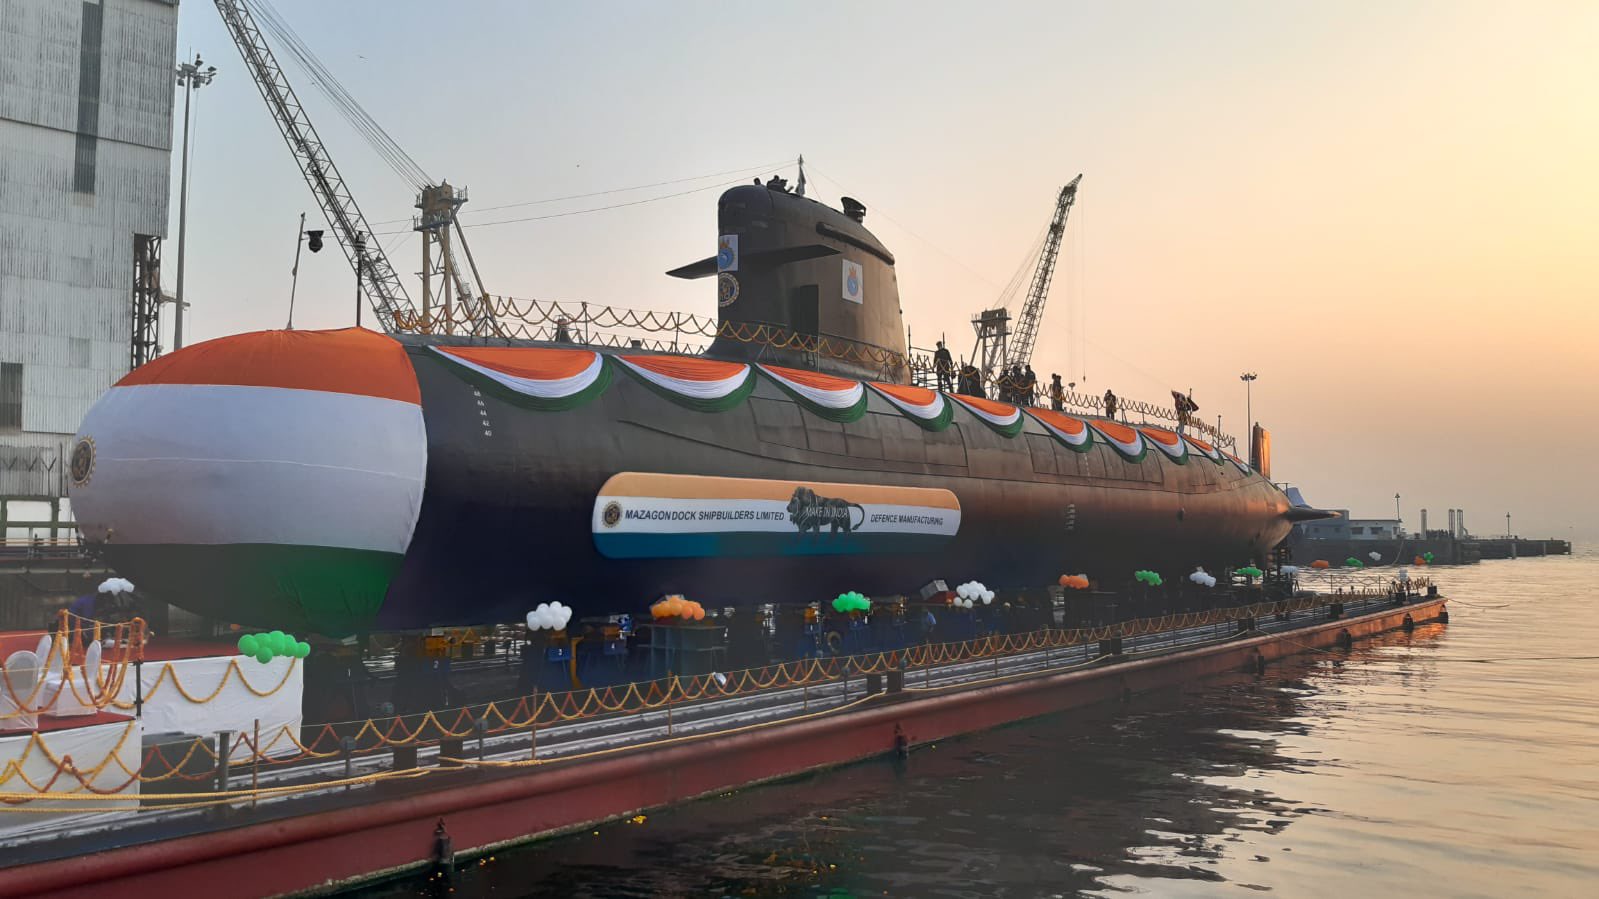 Indian Navy’s fifth Scorpene class submarine ‘Vagir’ launched – Indian Defence Research Wing